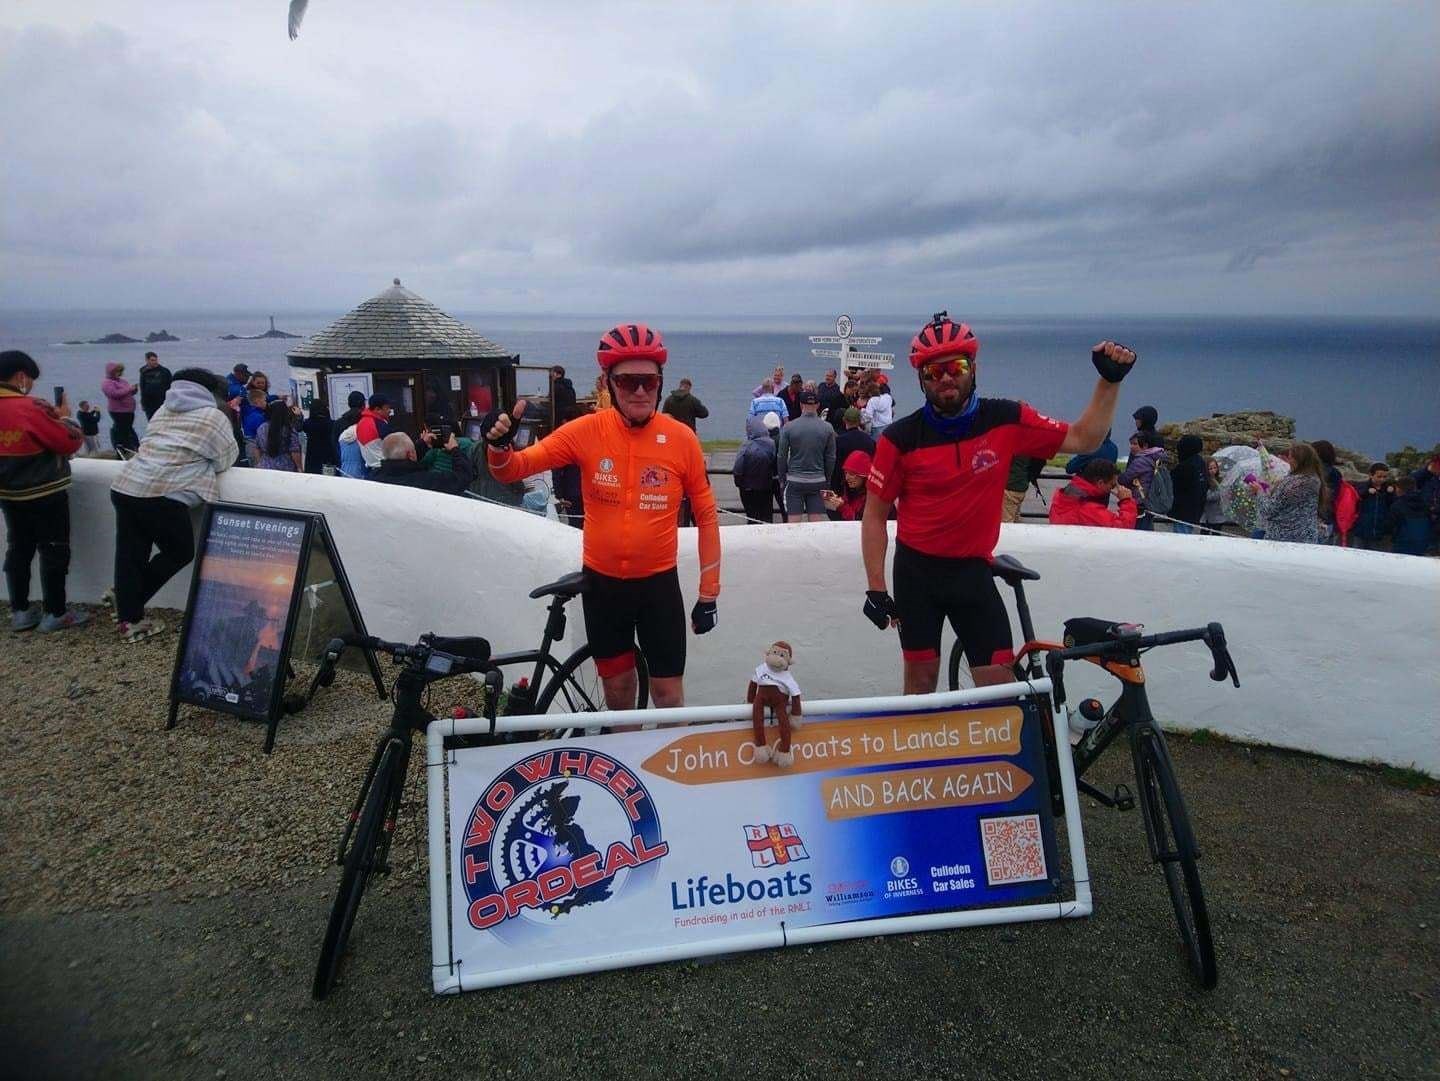 Greg and Norman made Land's End in less than six days, facing some challenging weather conditions along the way.